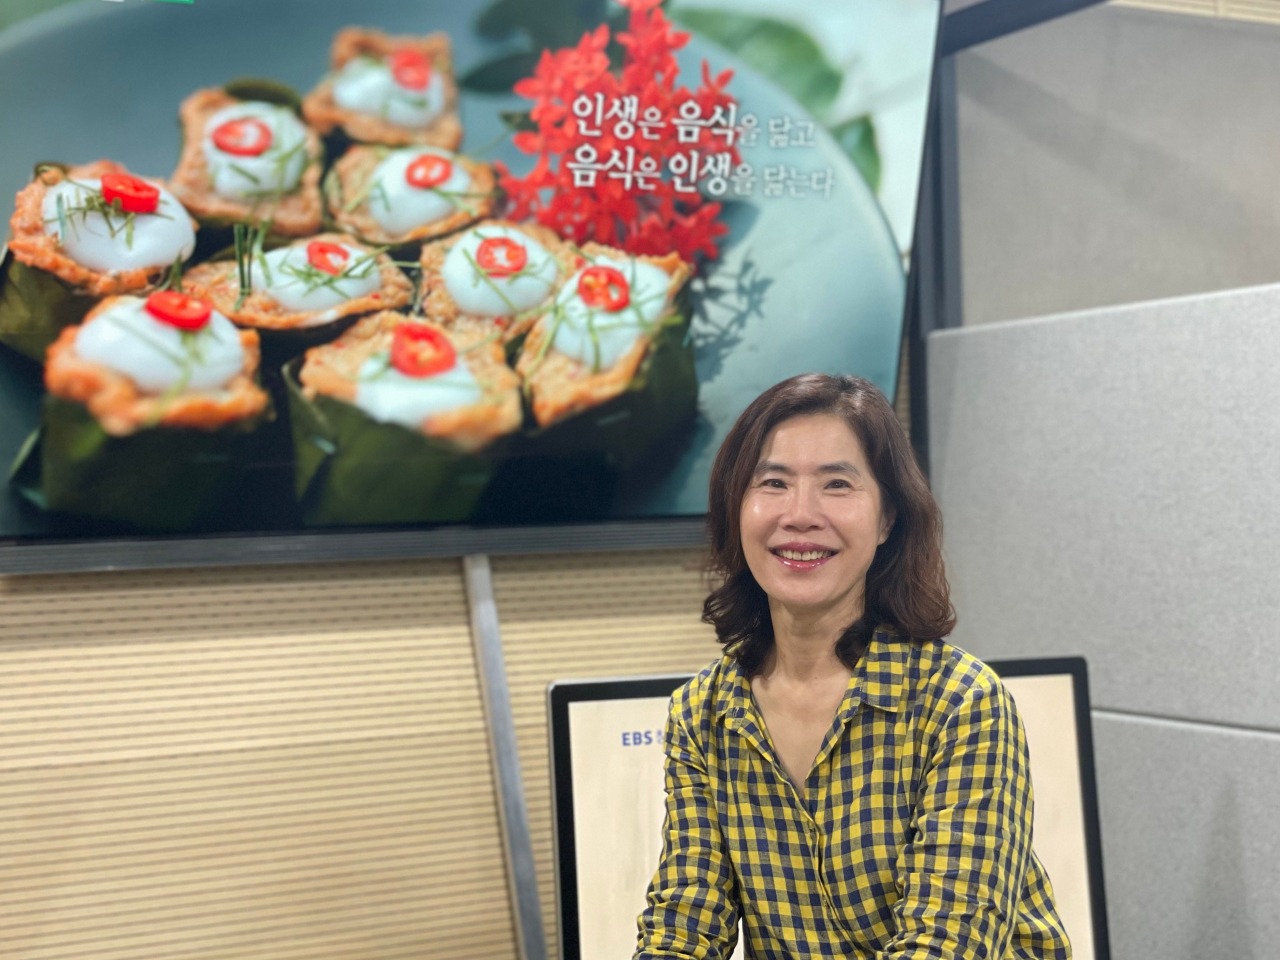 Documentary producer Chung Hyun-sook poses for a photo in her video editing office in Mapo-gu, western Seoul on Tuesday. (EBS)